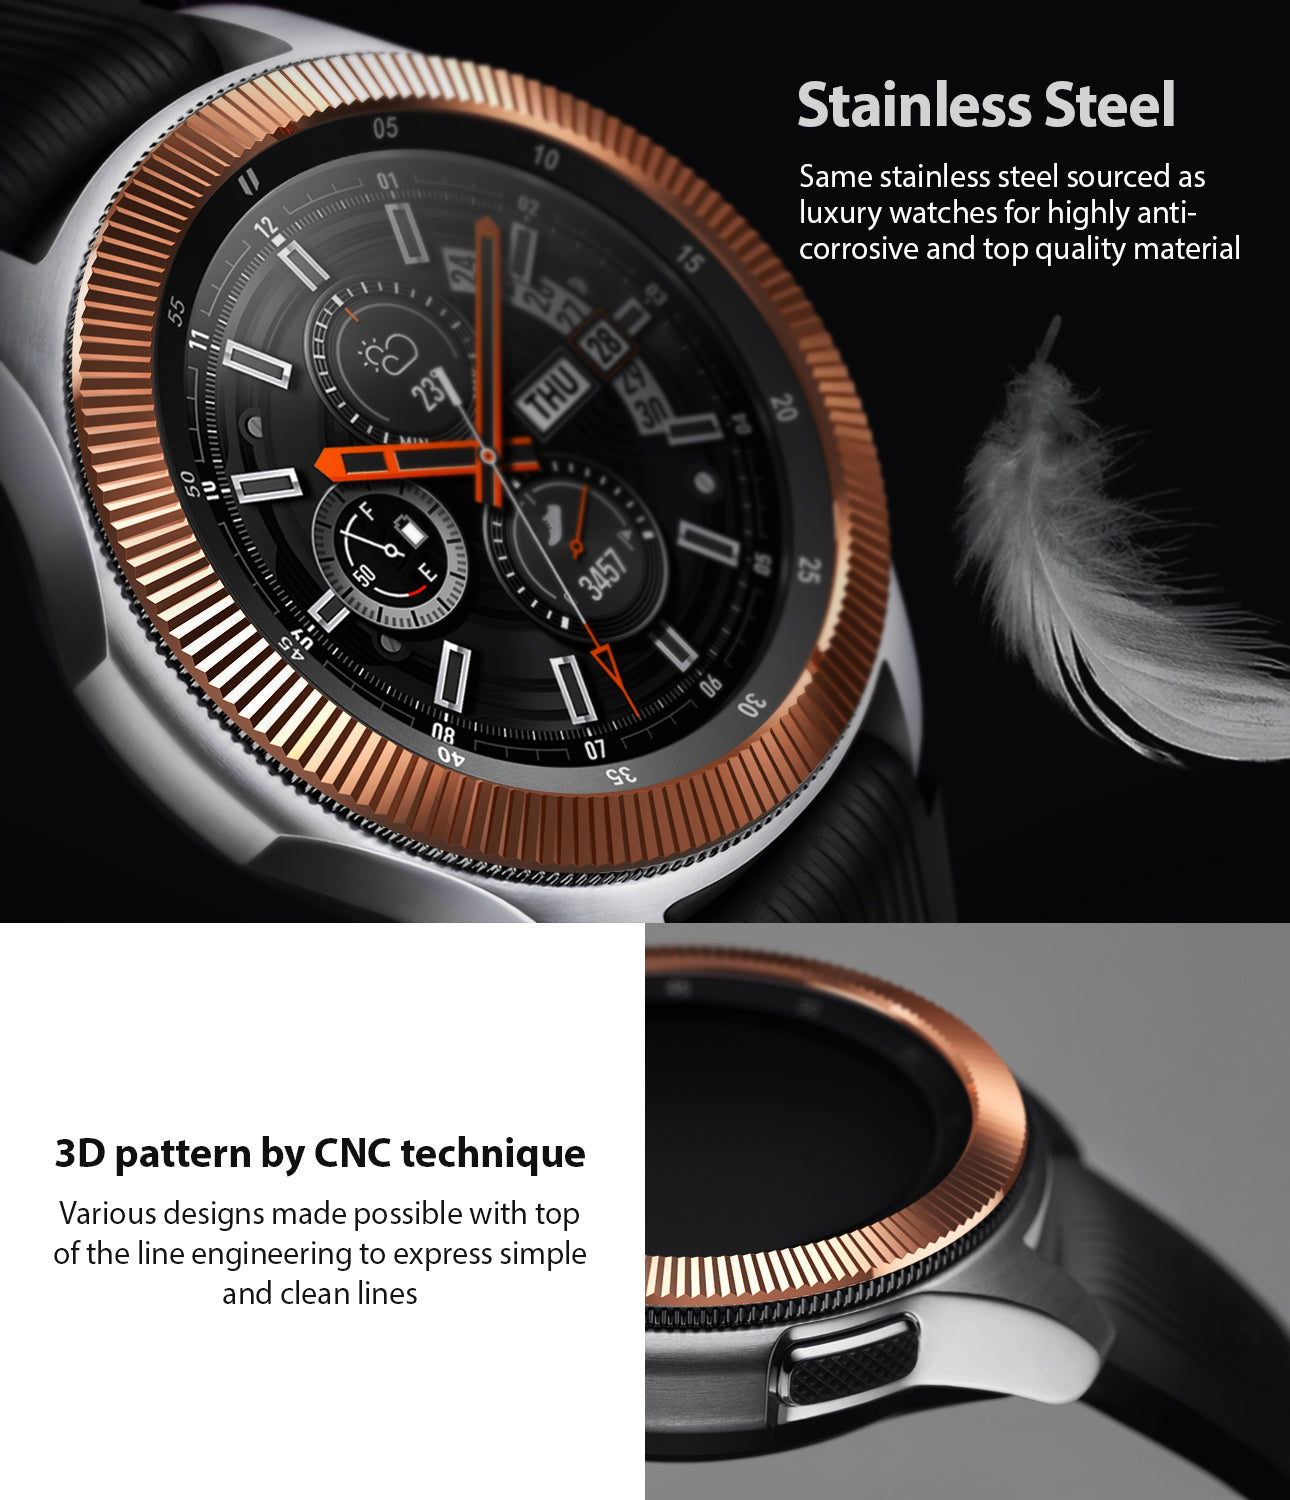 top quality stainless steel used to manufacture ringke bezel styling with 3d pattern by cnc technique for long lasting use